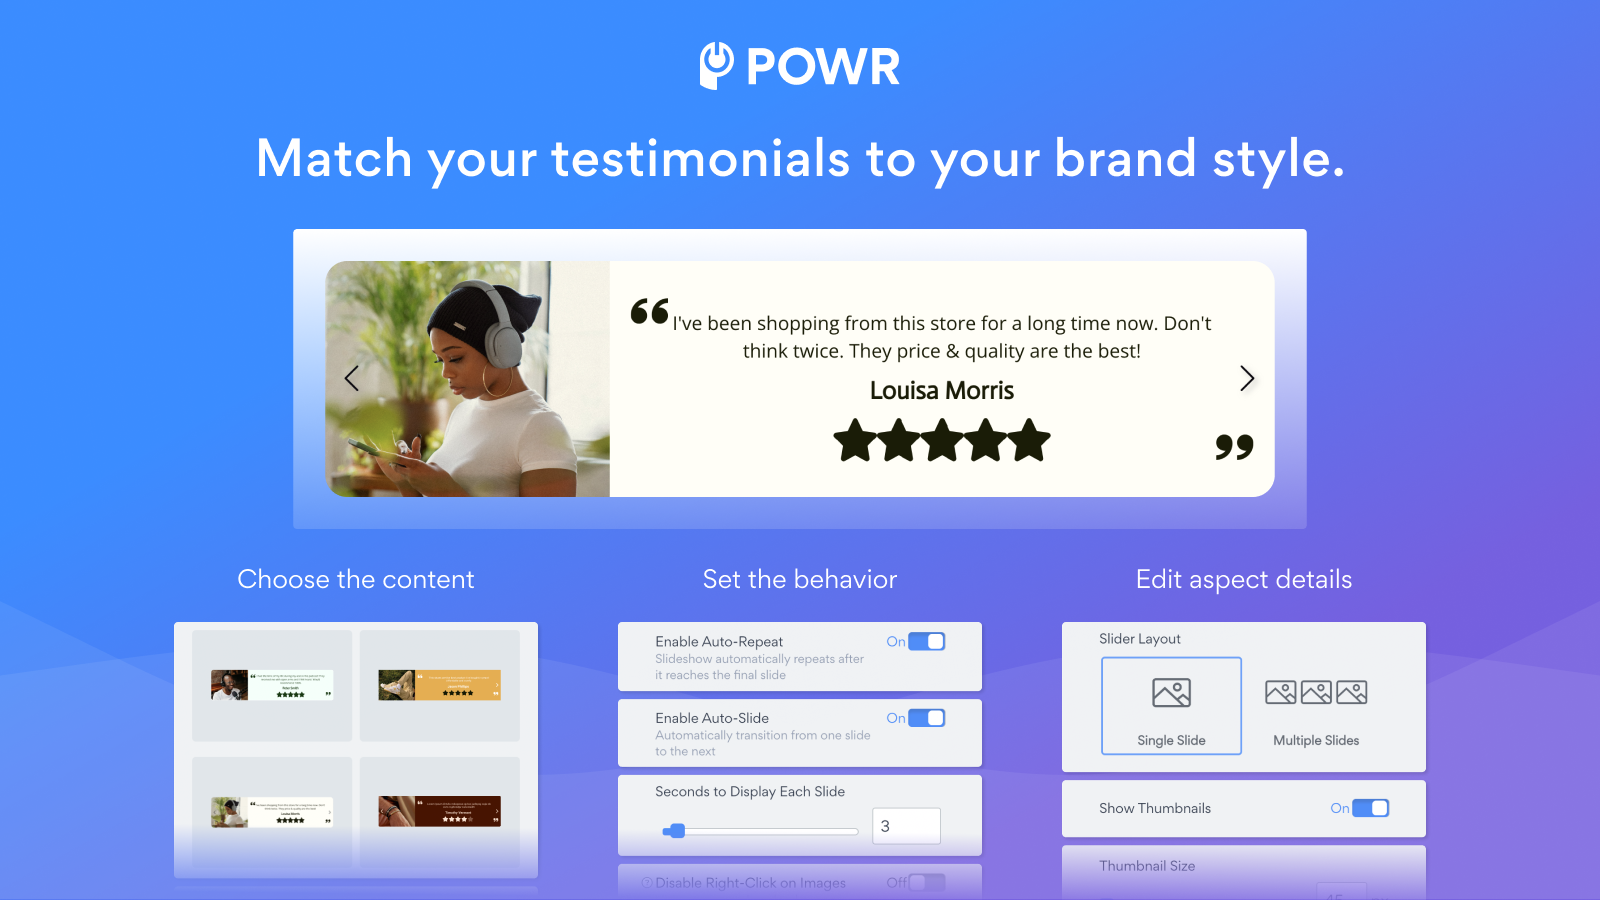 Match your testimonials to your brand